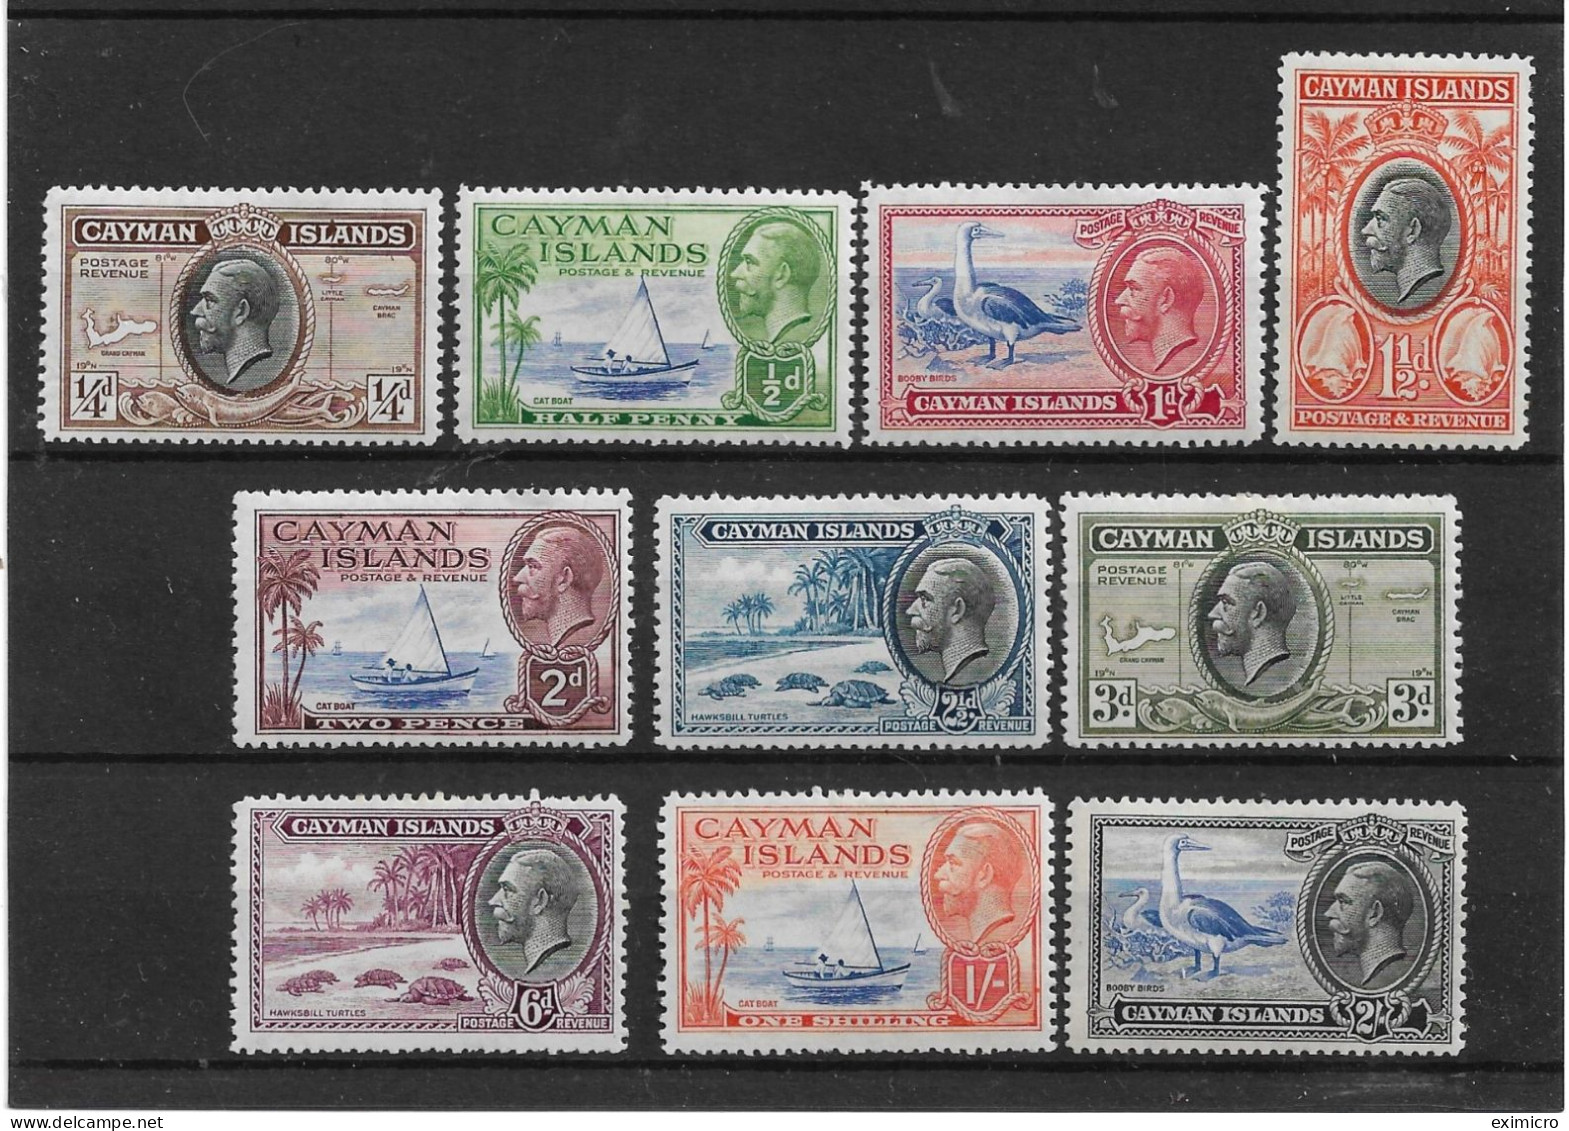 CAYMAN ISLANDS 1935 SET TO 2s SG 96/105 LIGHTLY MOUNTED MINT Cat £81 - Cayman Islands